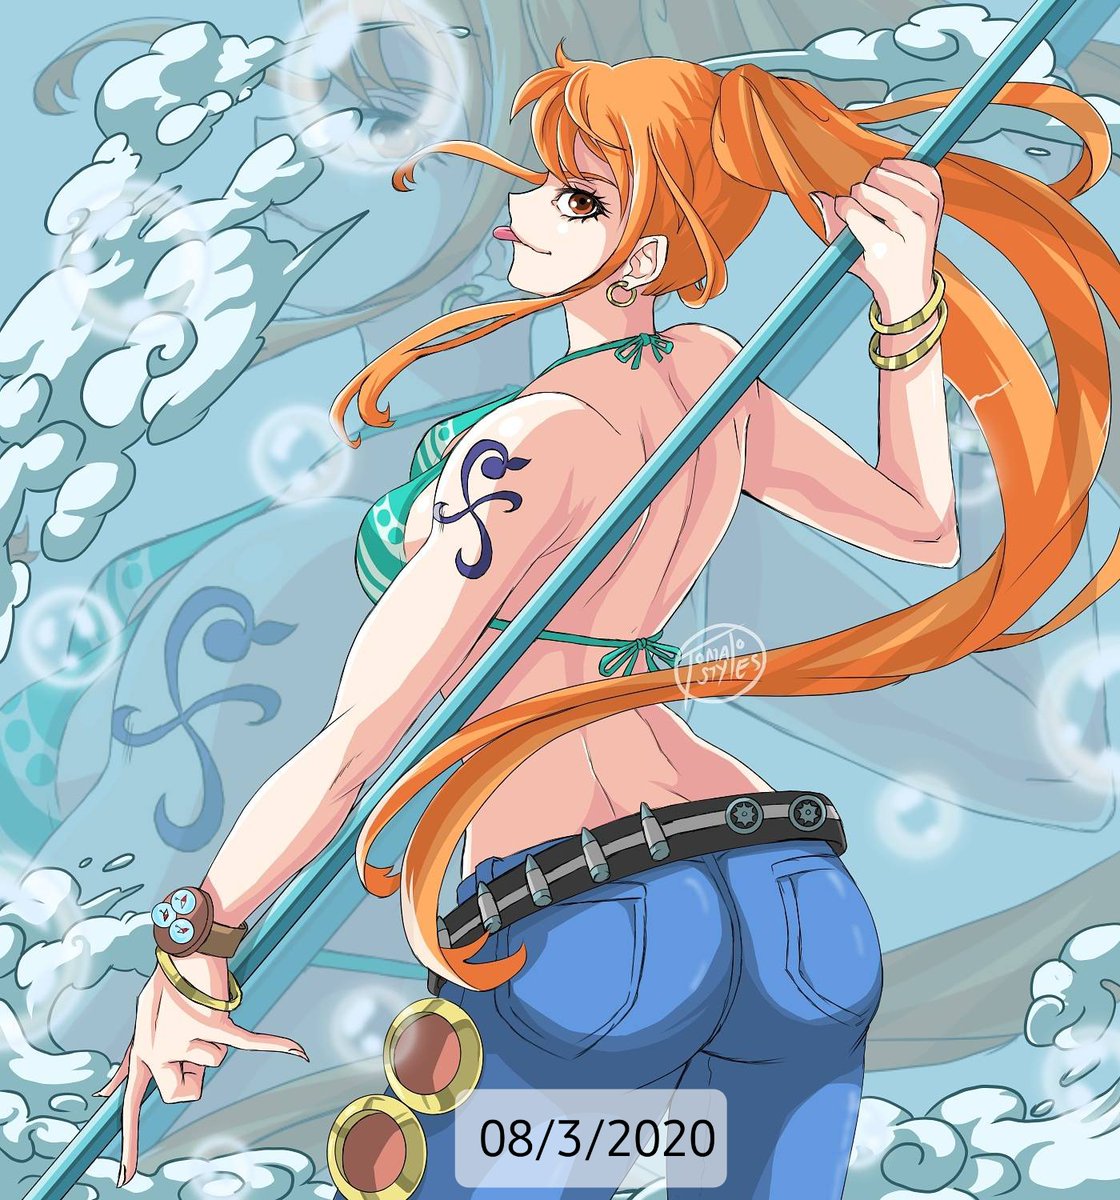 Re posting some old drawing Nami from One Piece.#nami ナ ミ #fanart #digital ...